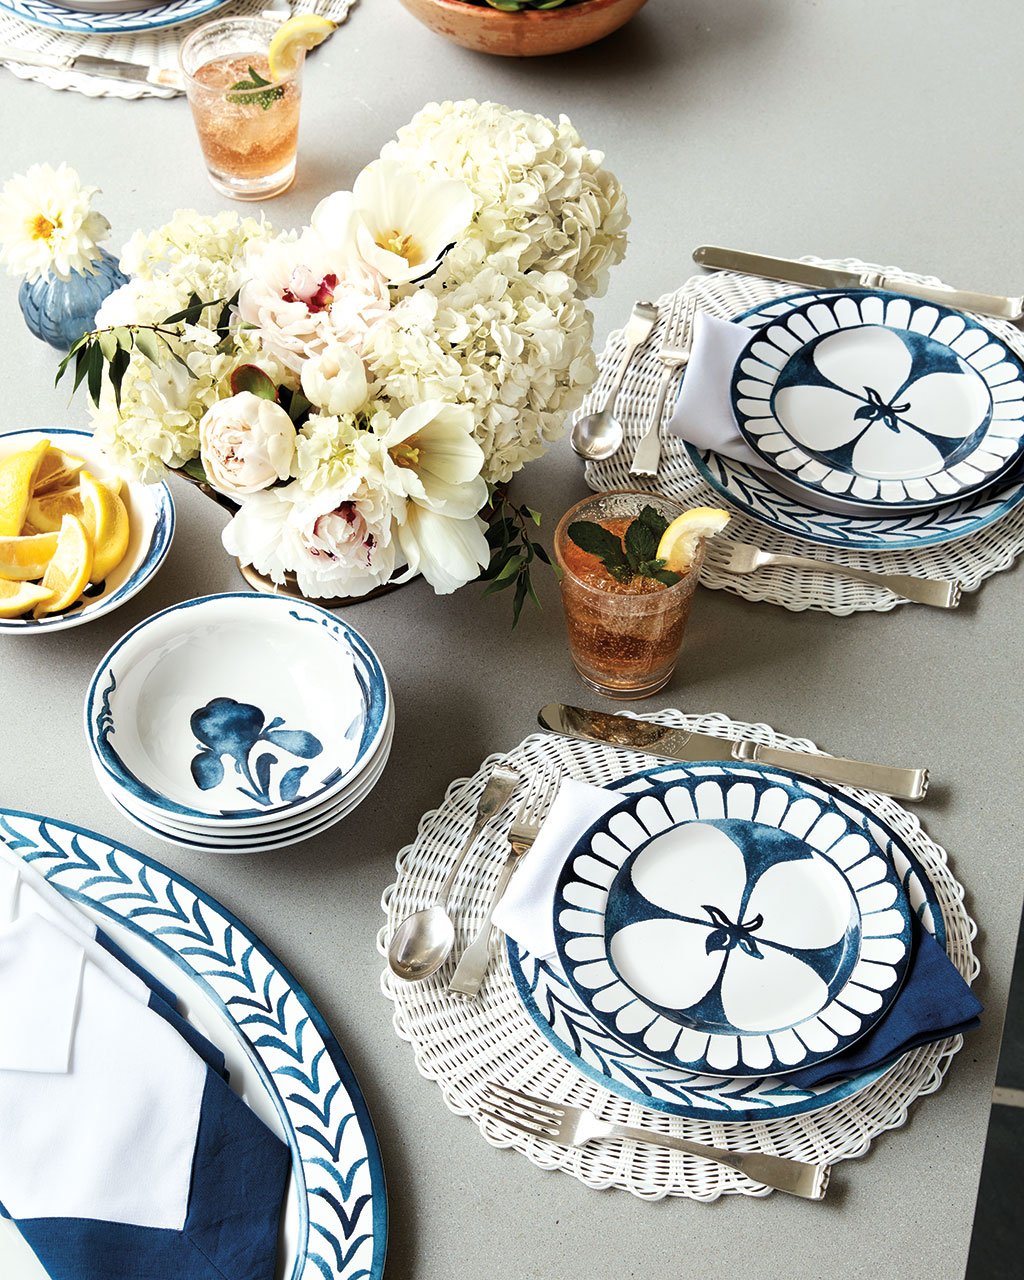 How to Host a Great Summer Party - How to Decorate